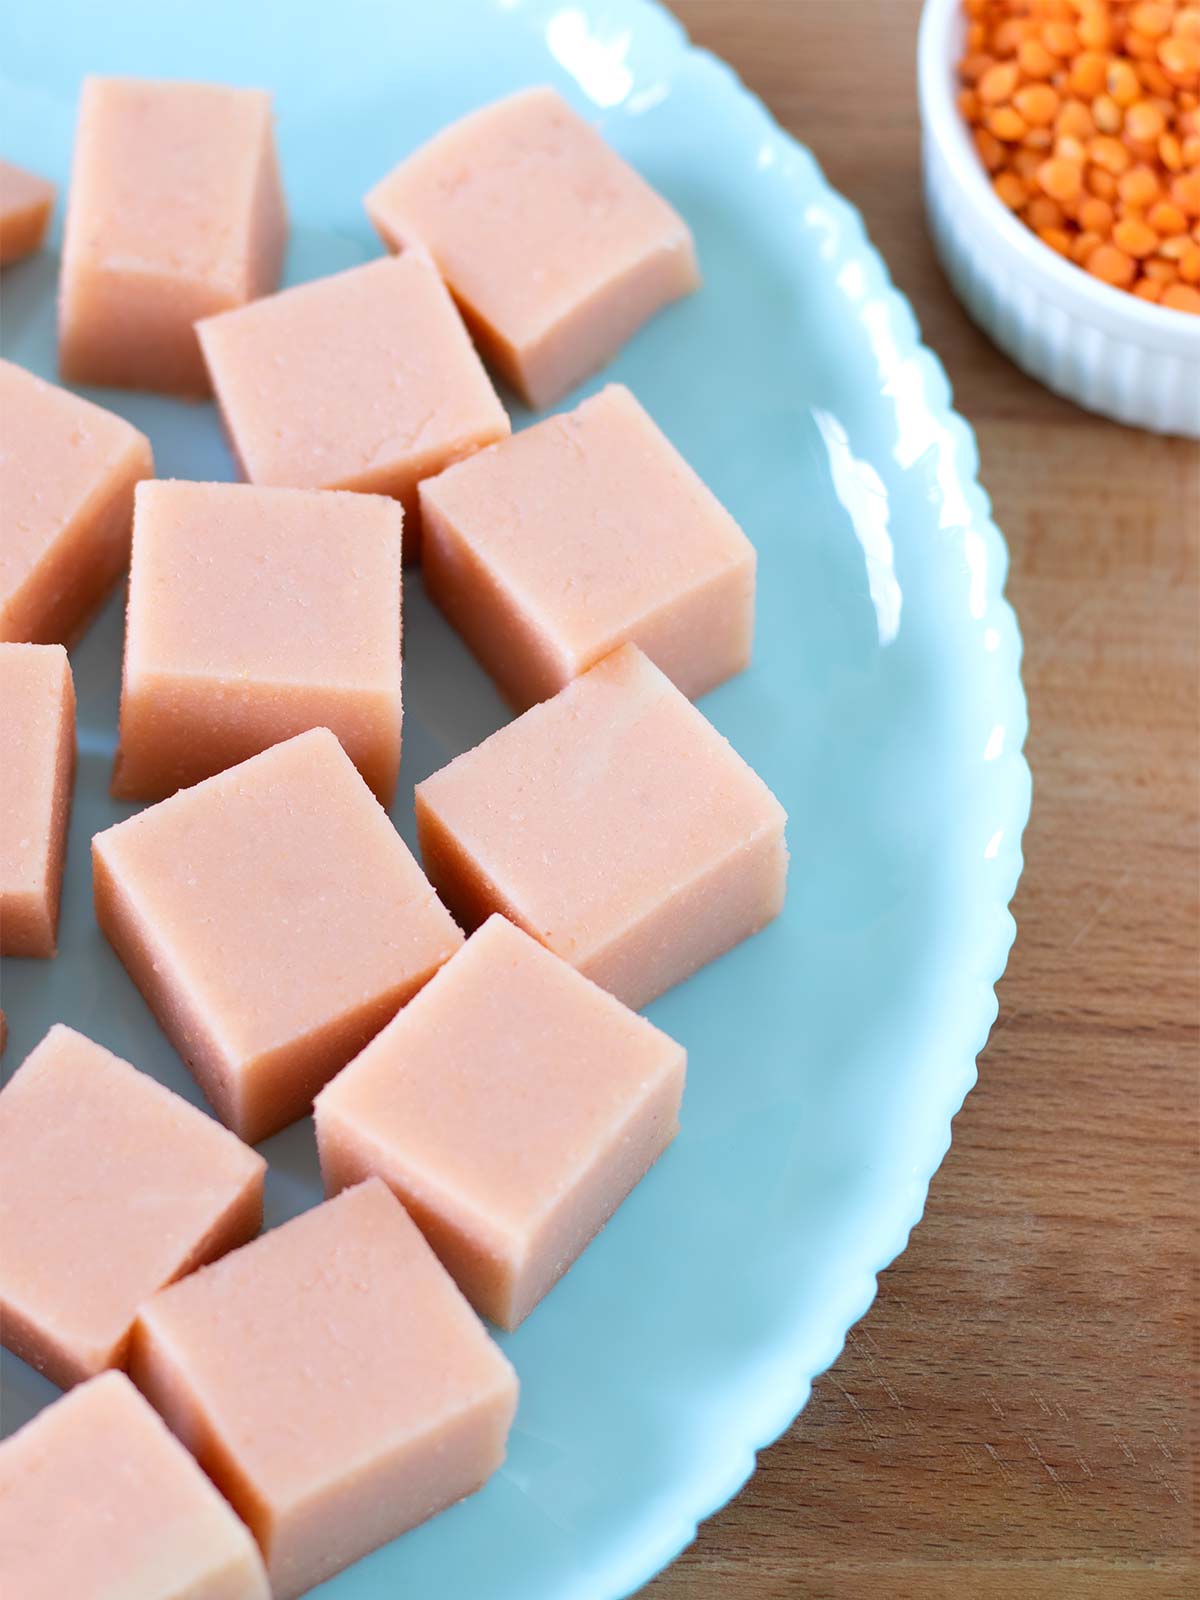 Budget-friendly plant-based non-soy tofu made with red lentils and water.